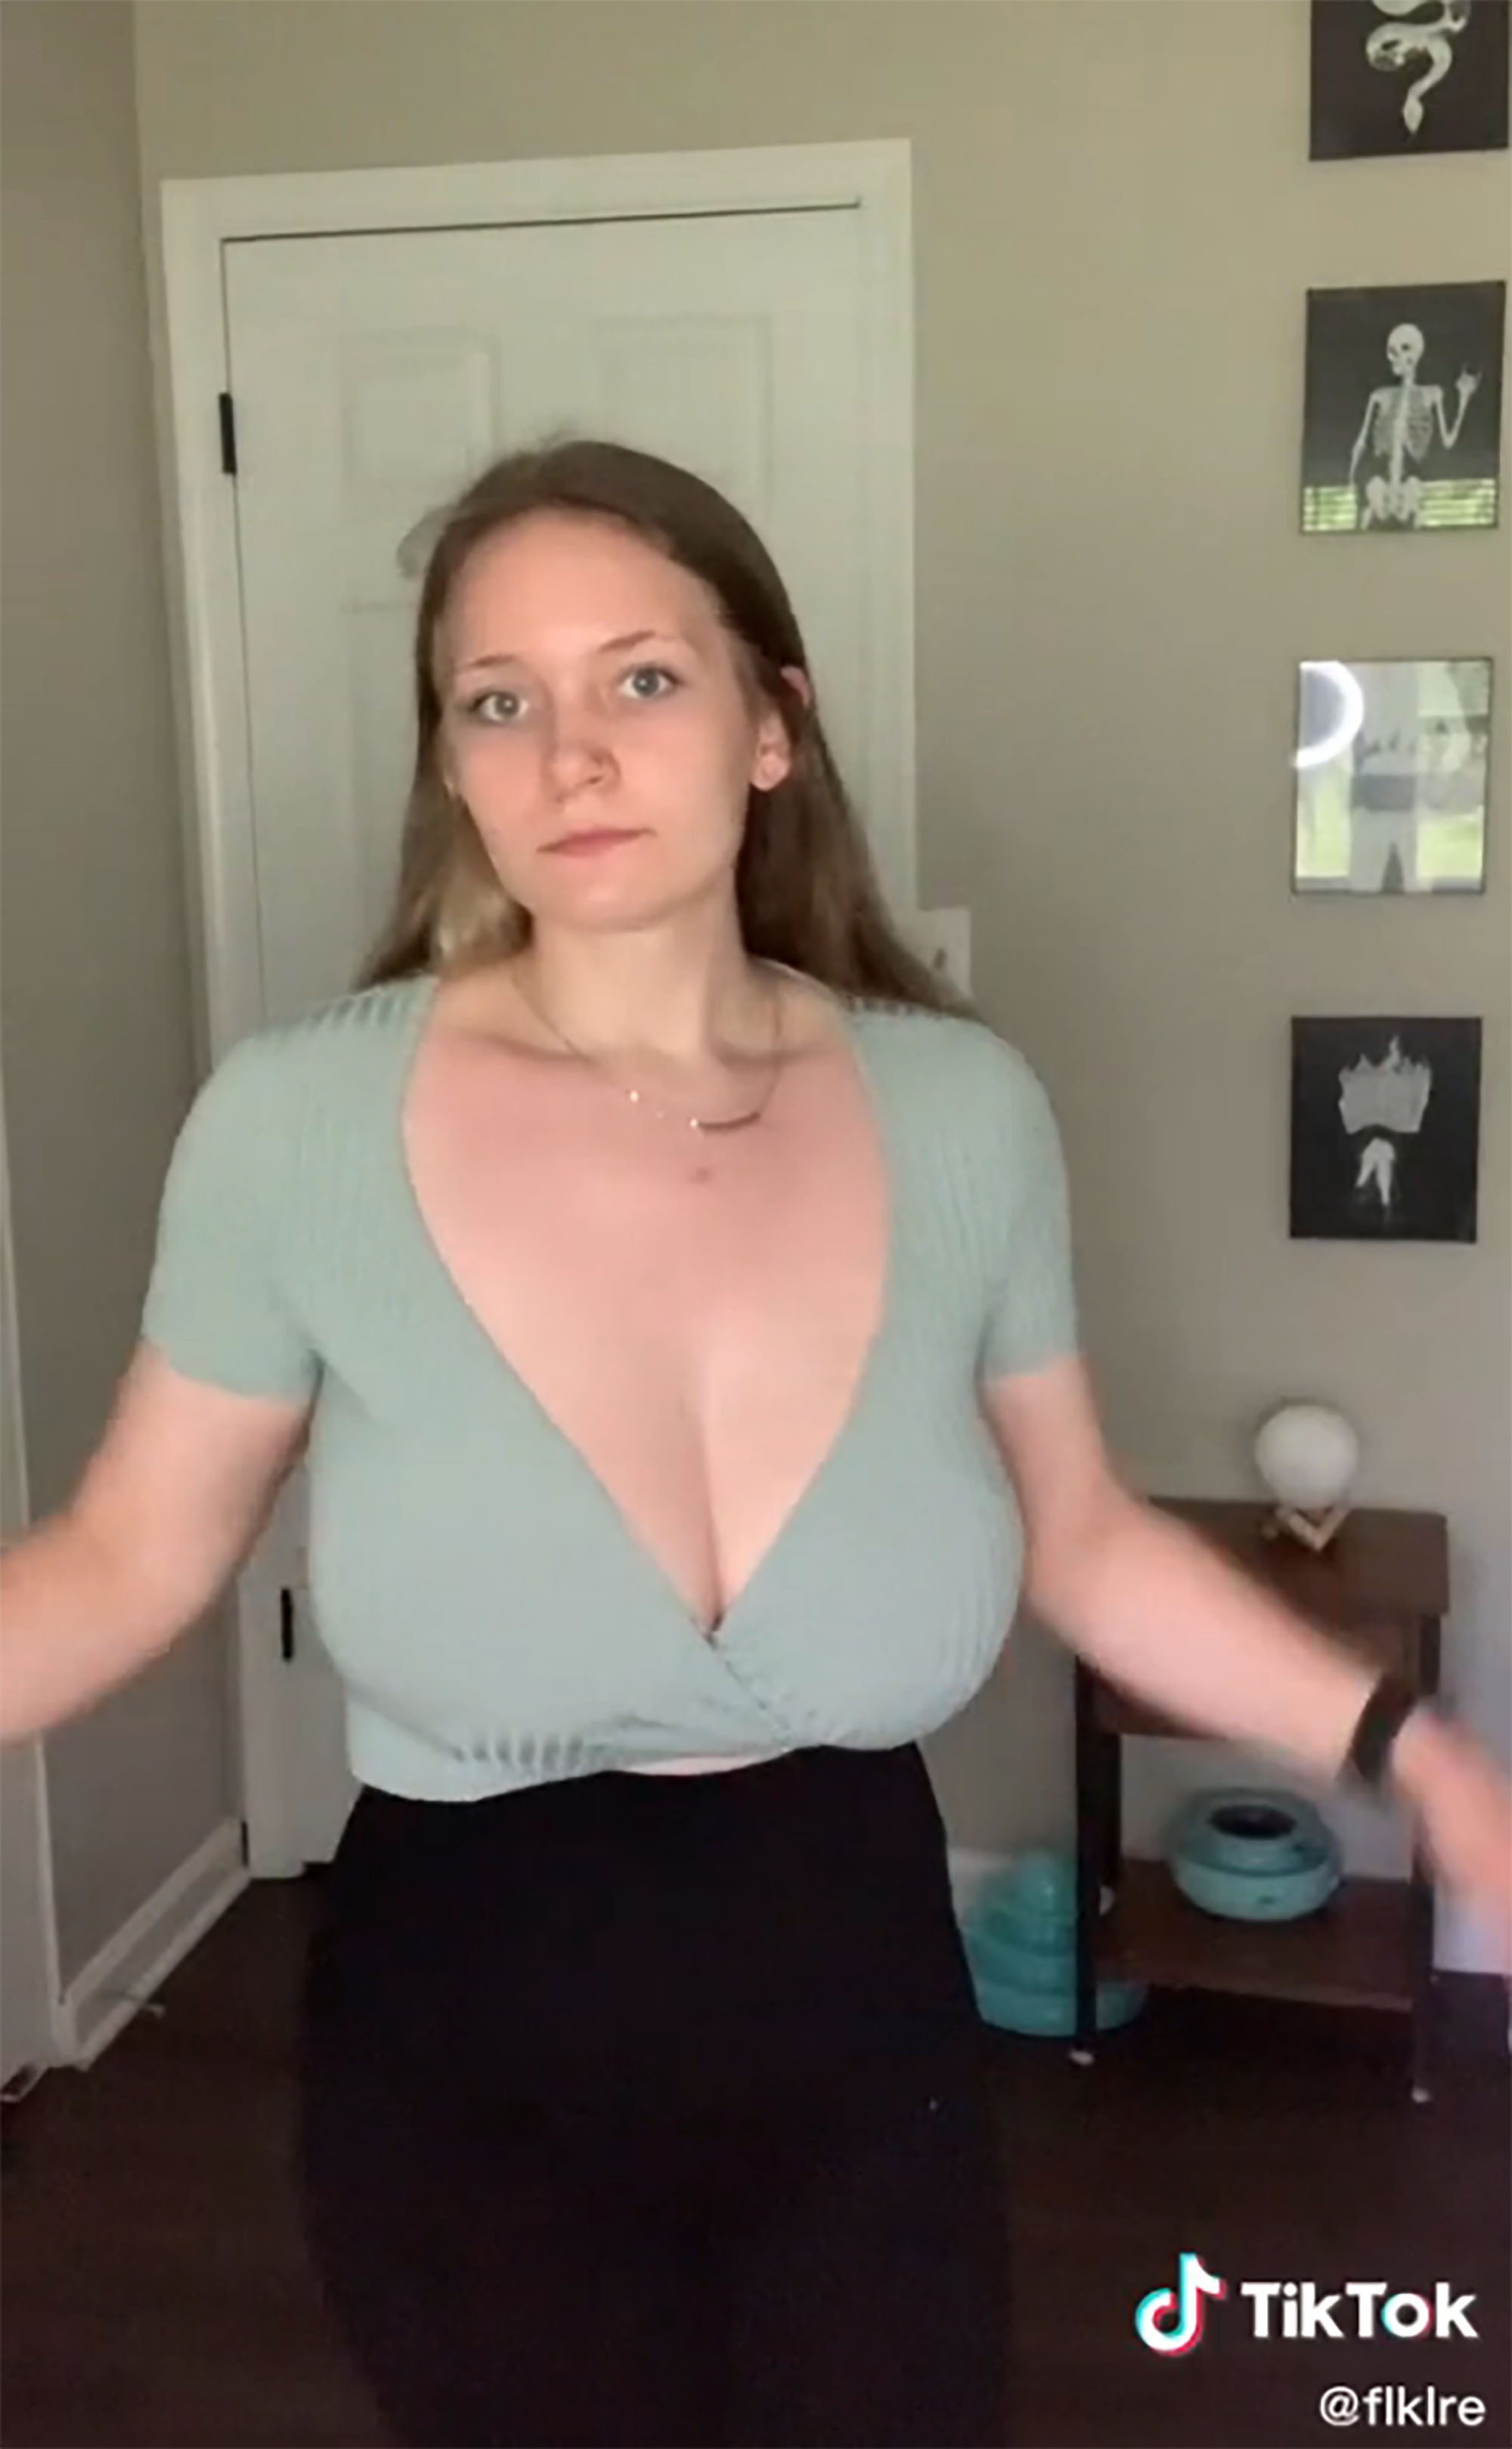 denika butler recommends she shows her boobs pic